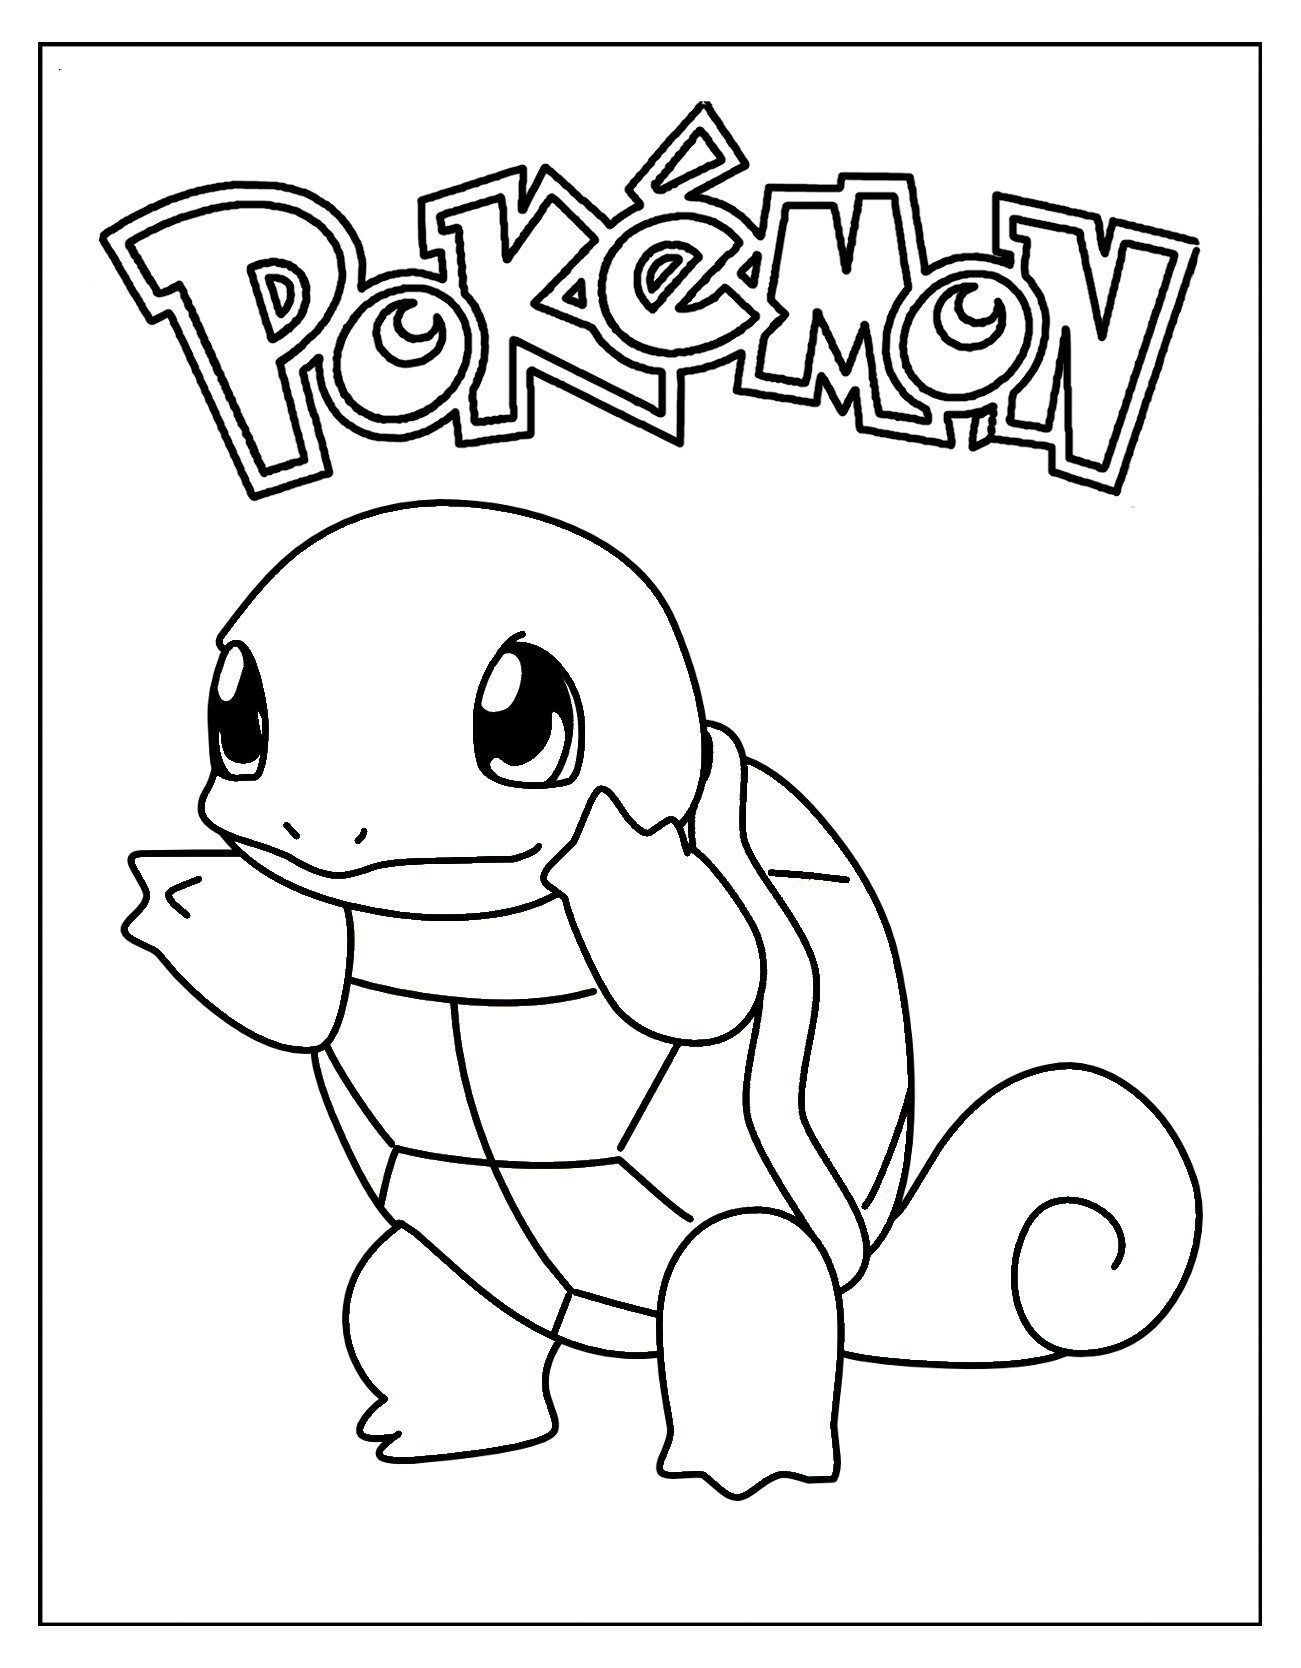 Pokemon Squirtle Coloring Pages Wallpaper